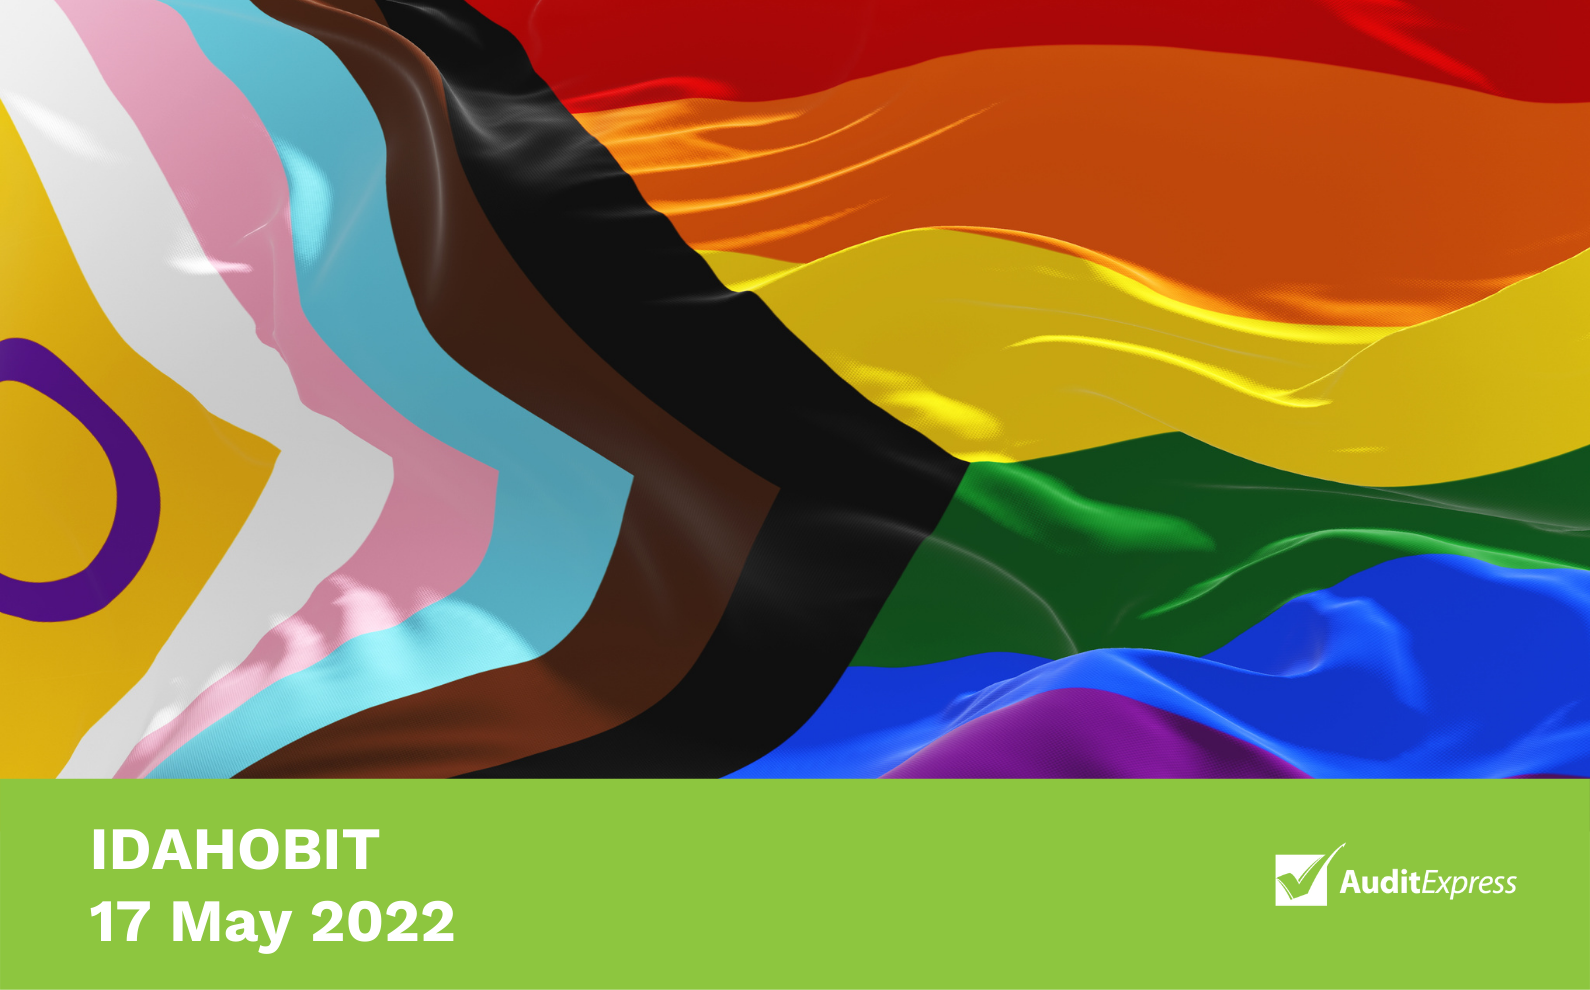 Pride Progress flag with IDAHOBIT, 17 May 2022 label and Audit Express logo